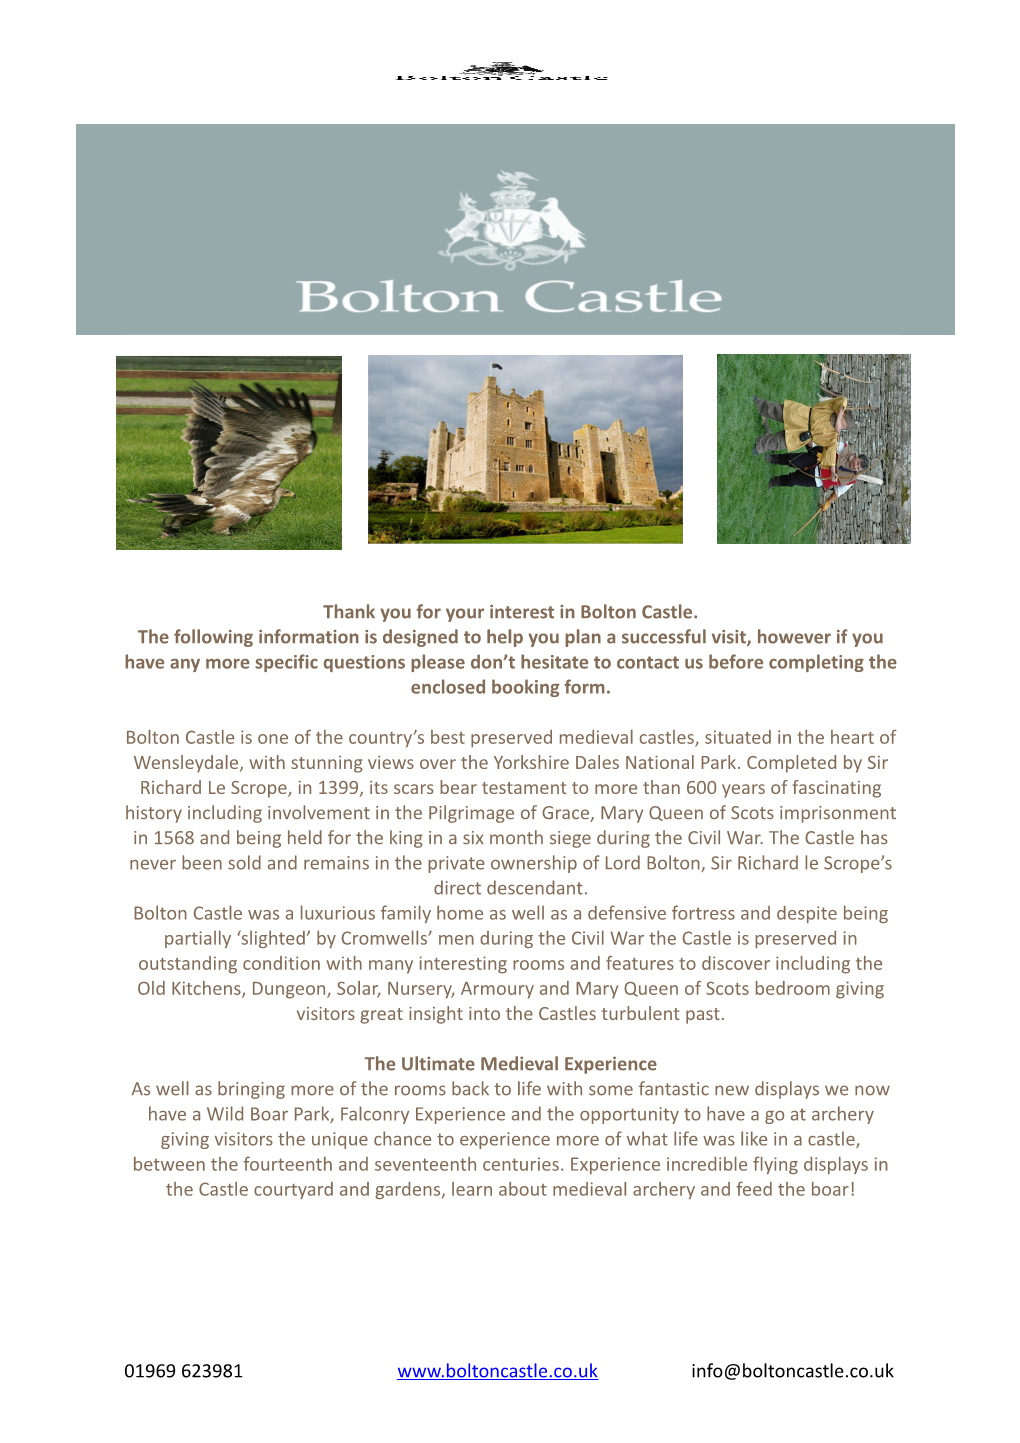 Thank You for Your Interest in Bolton Castle